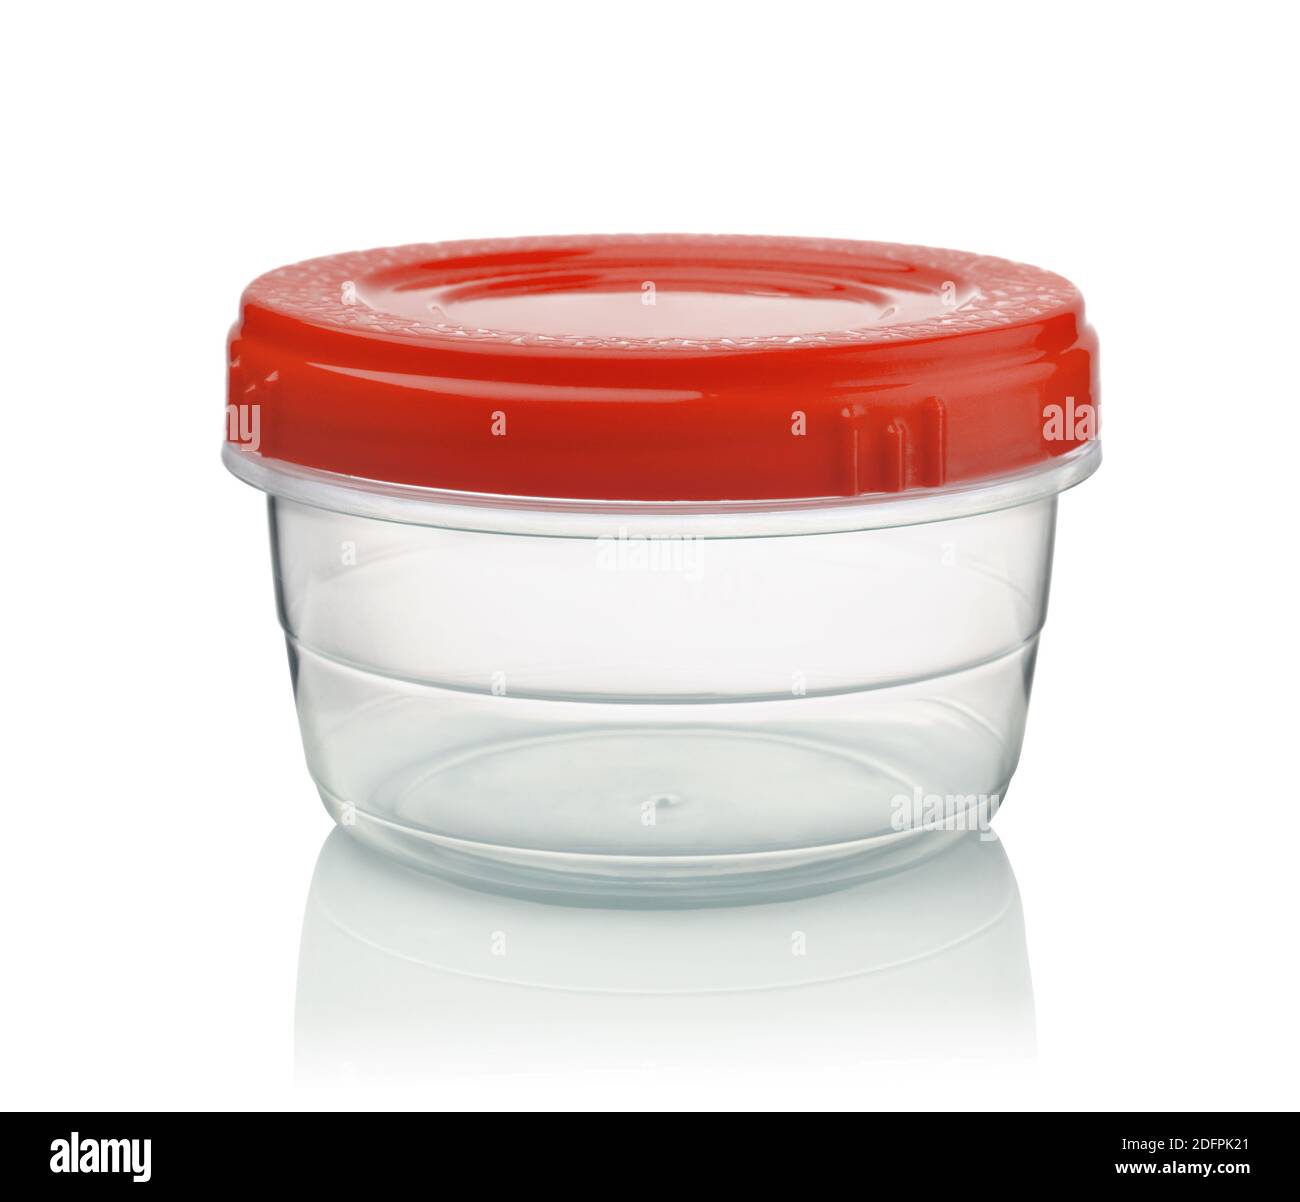 https://c8.alamy.com/comp/2DFPK21/round-plastic-food-container-with-red-lid-isolated-on-white-2DFPK21.jpg